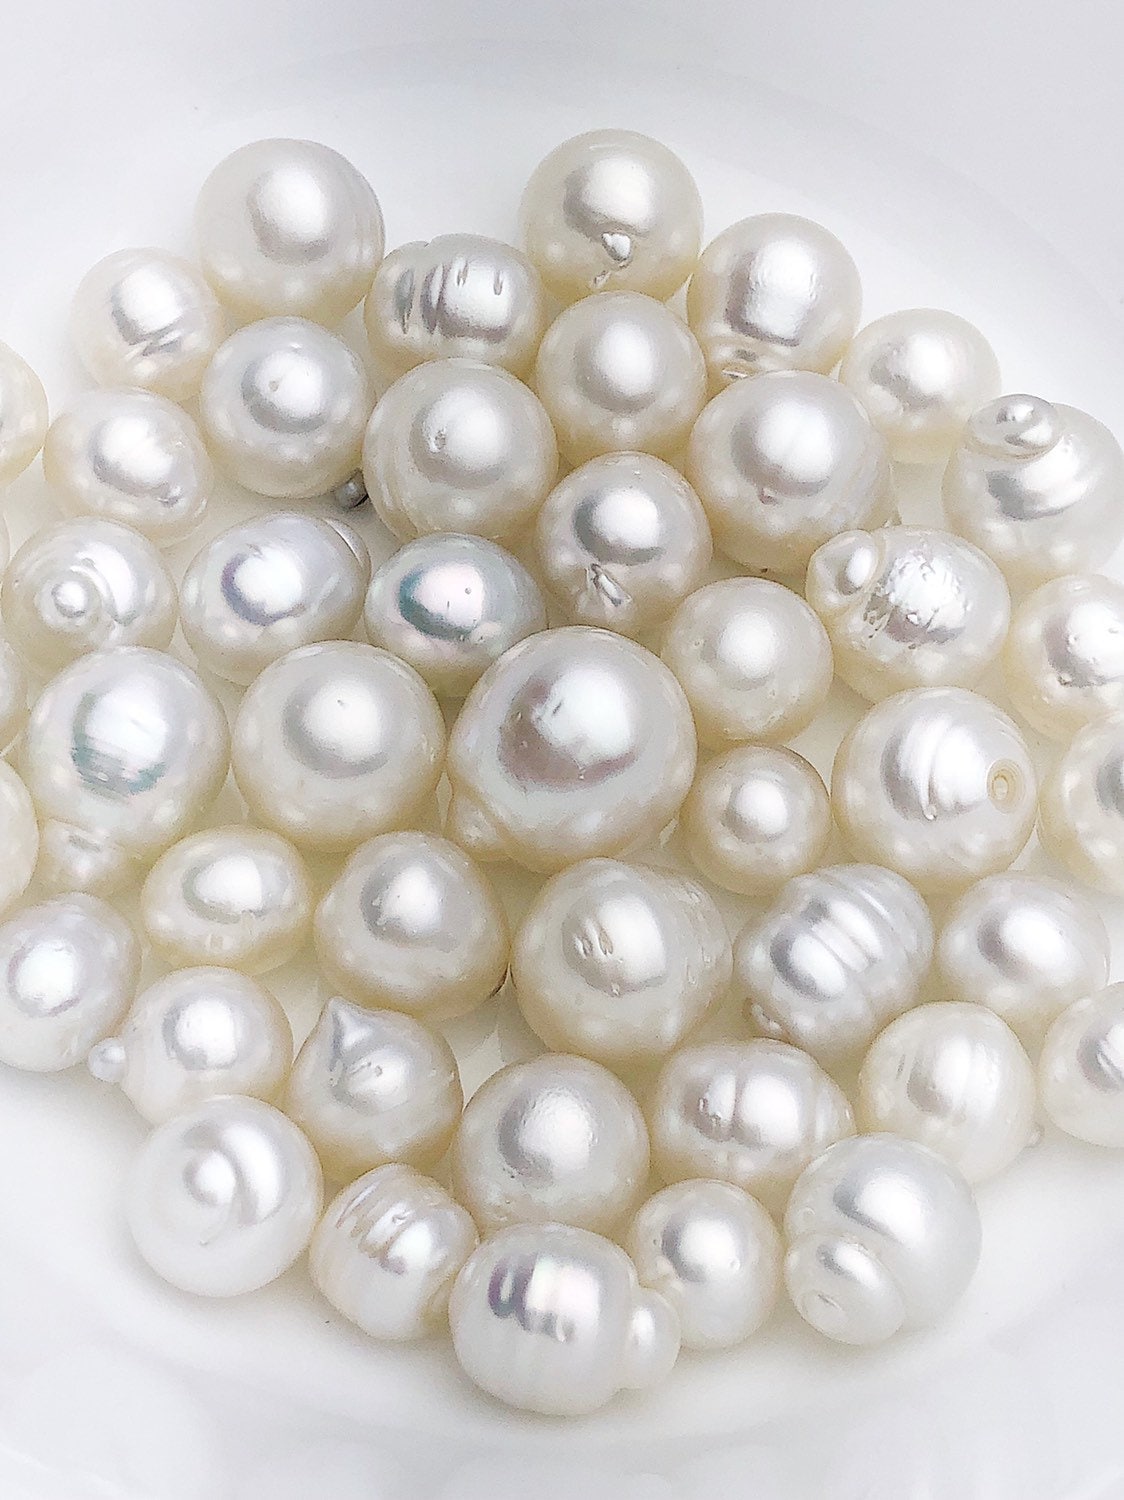 Golden South Sea Loose Pearls, Ovals - Drops, 10mm - 12mm, AA Quality –  Aloha Pearls & Schwartz